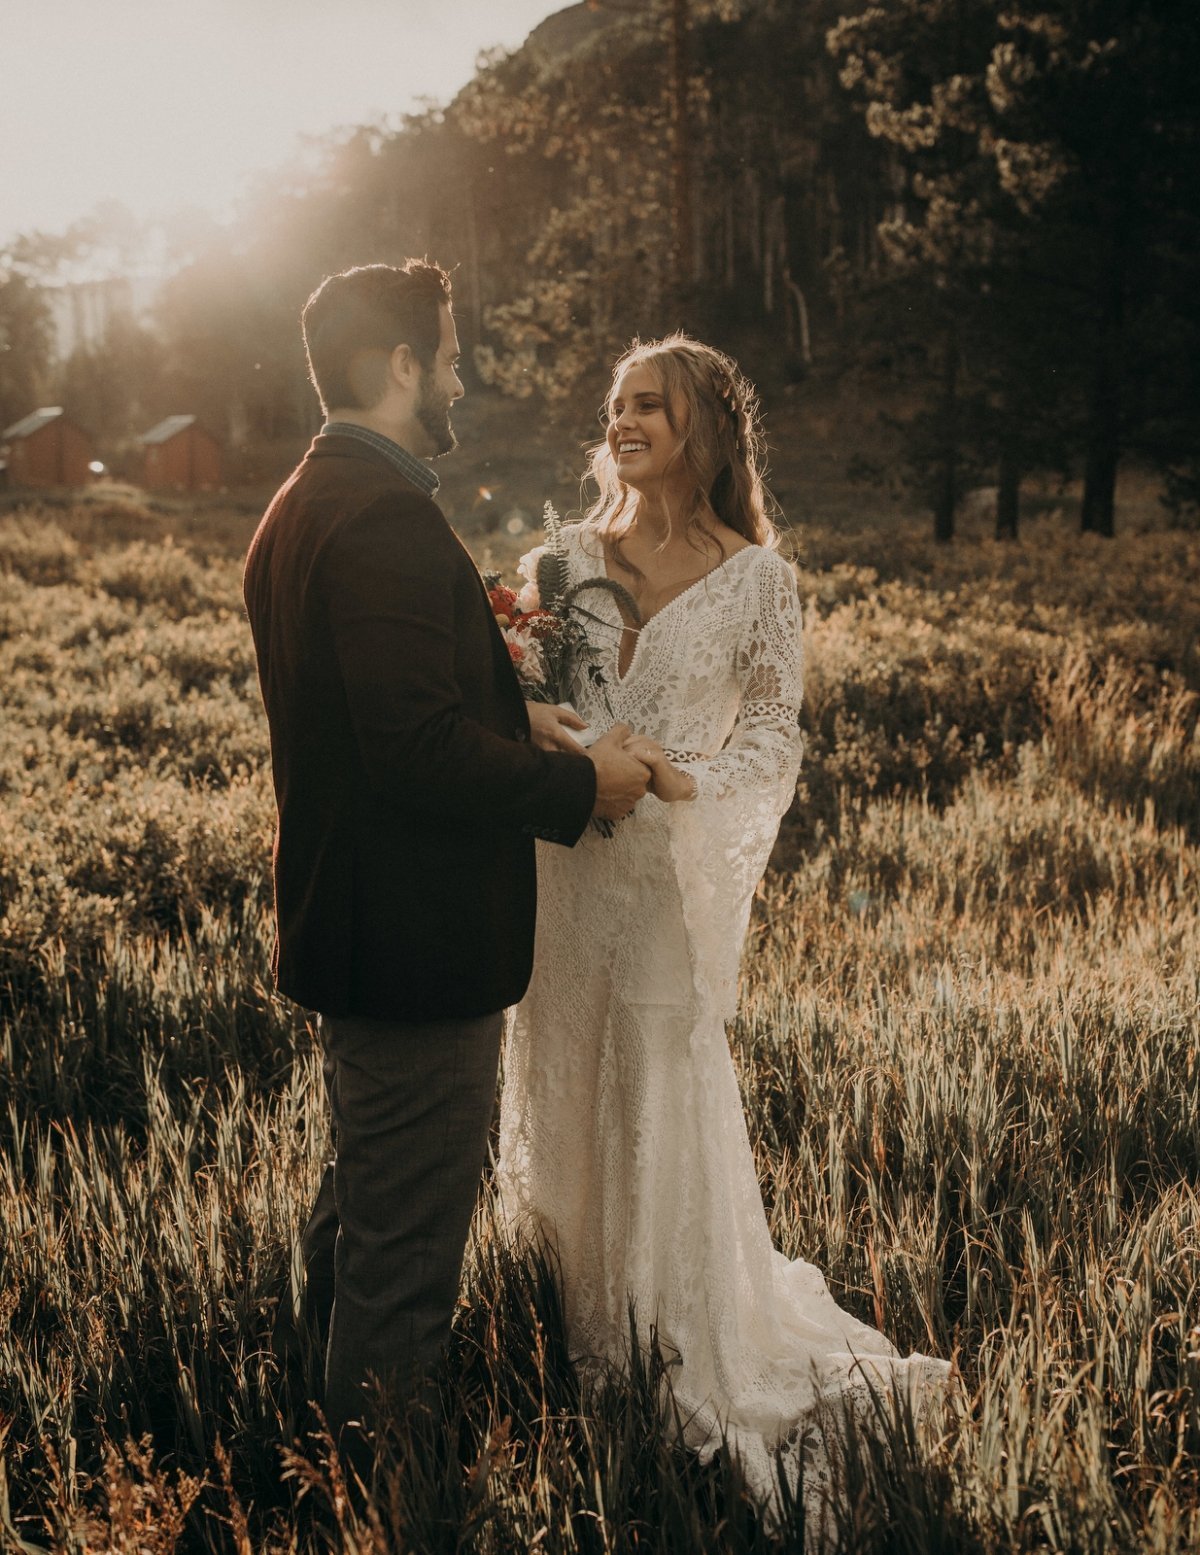 Boho Elopement Inspiration Session in Vail, Colorado | Wandering Weddings